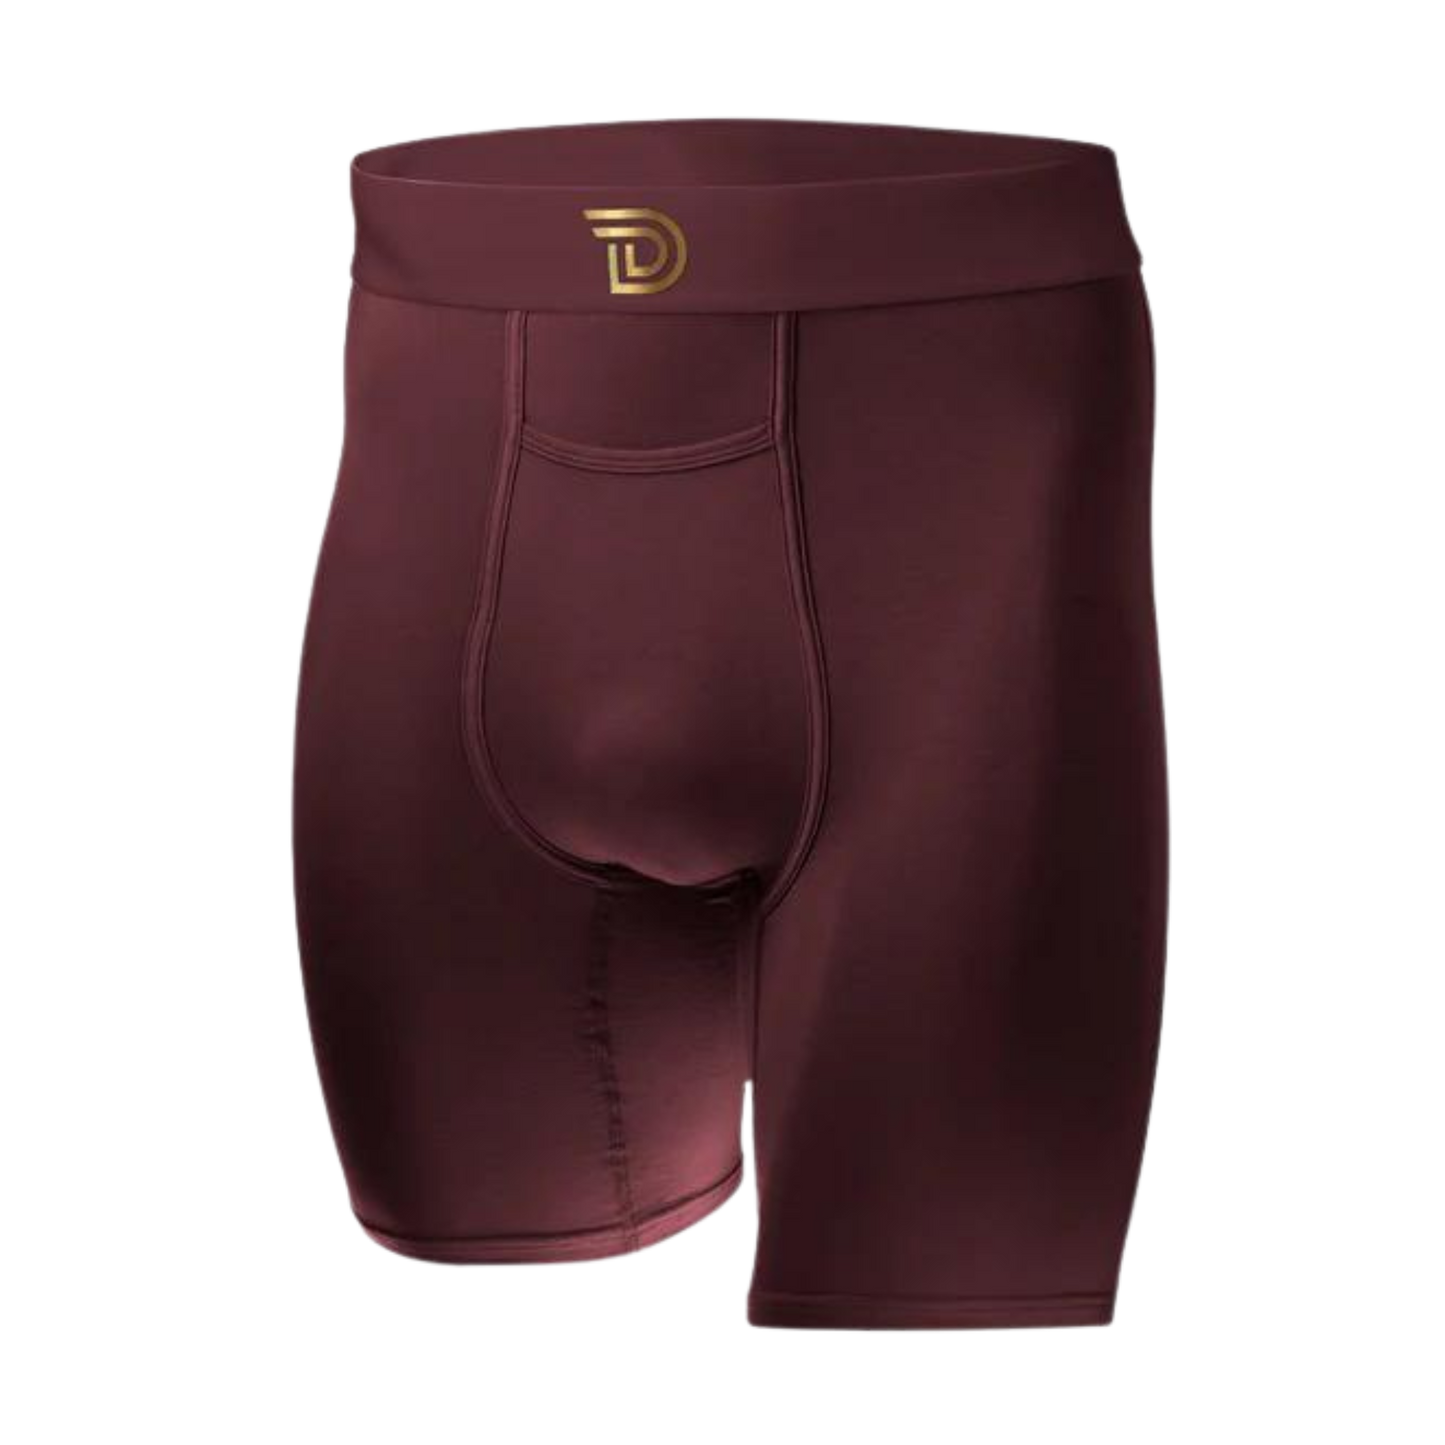 Drawlz Brand Co. , LLC Boxer Brief Ultimate Final Four Pack